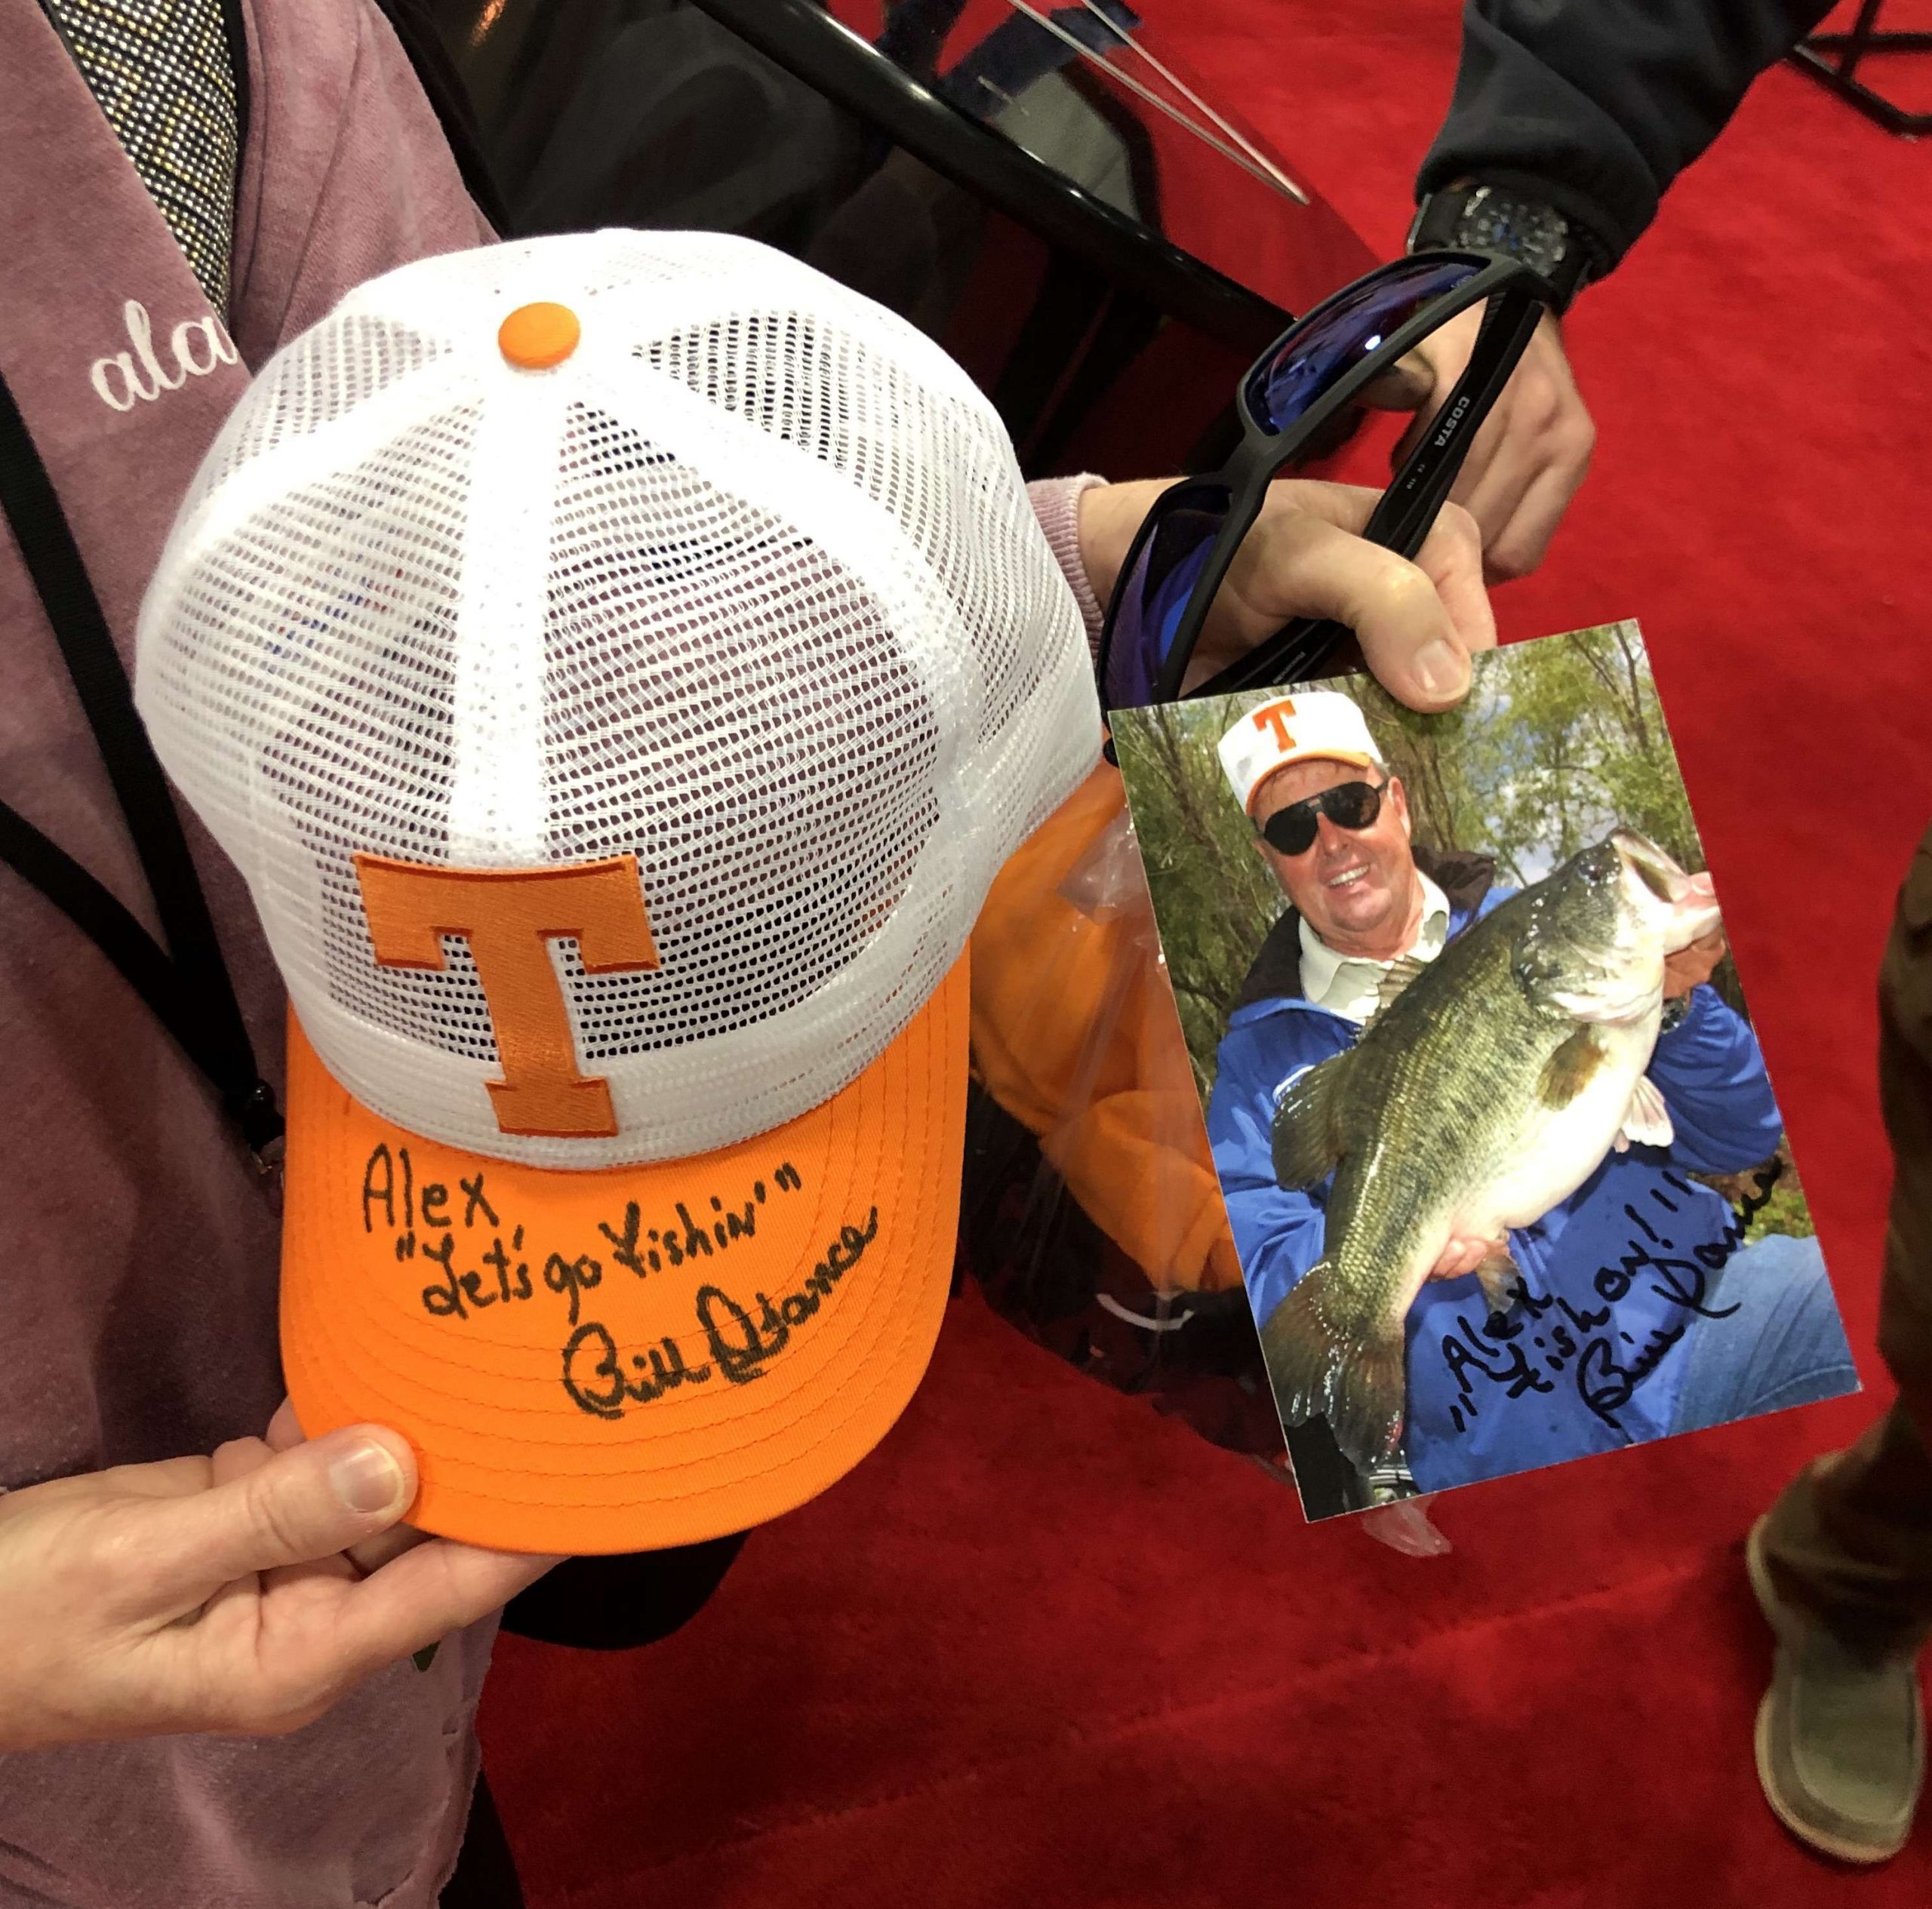 Dance gave him a signed Tennessee hat along with a photo.